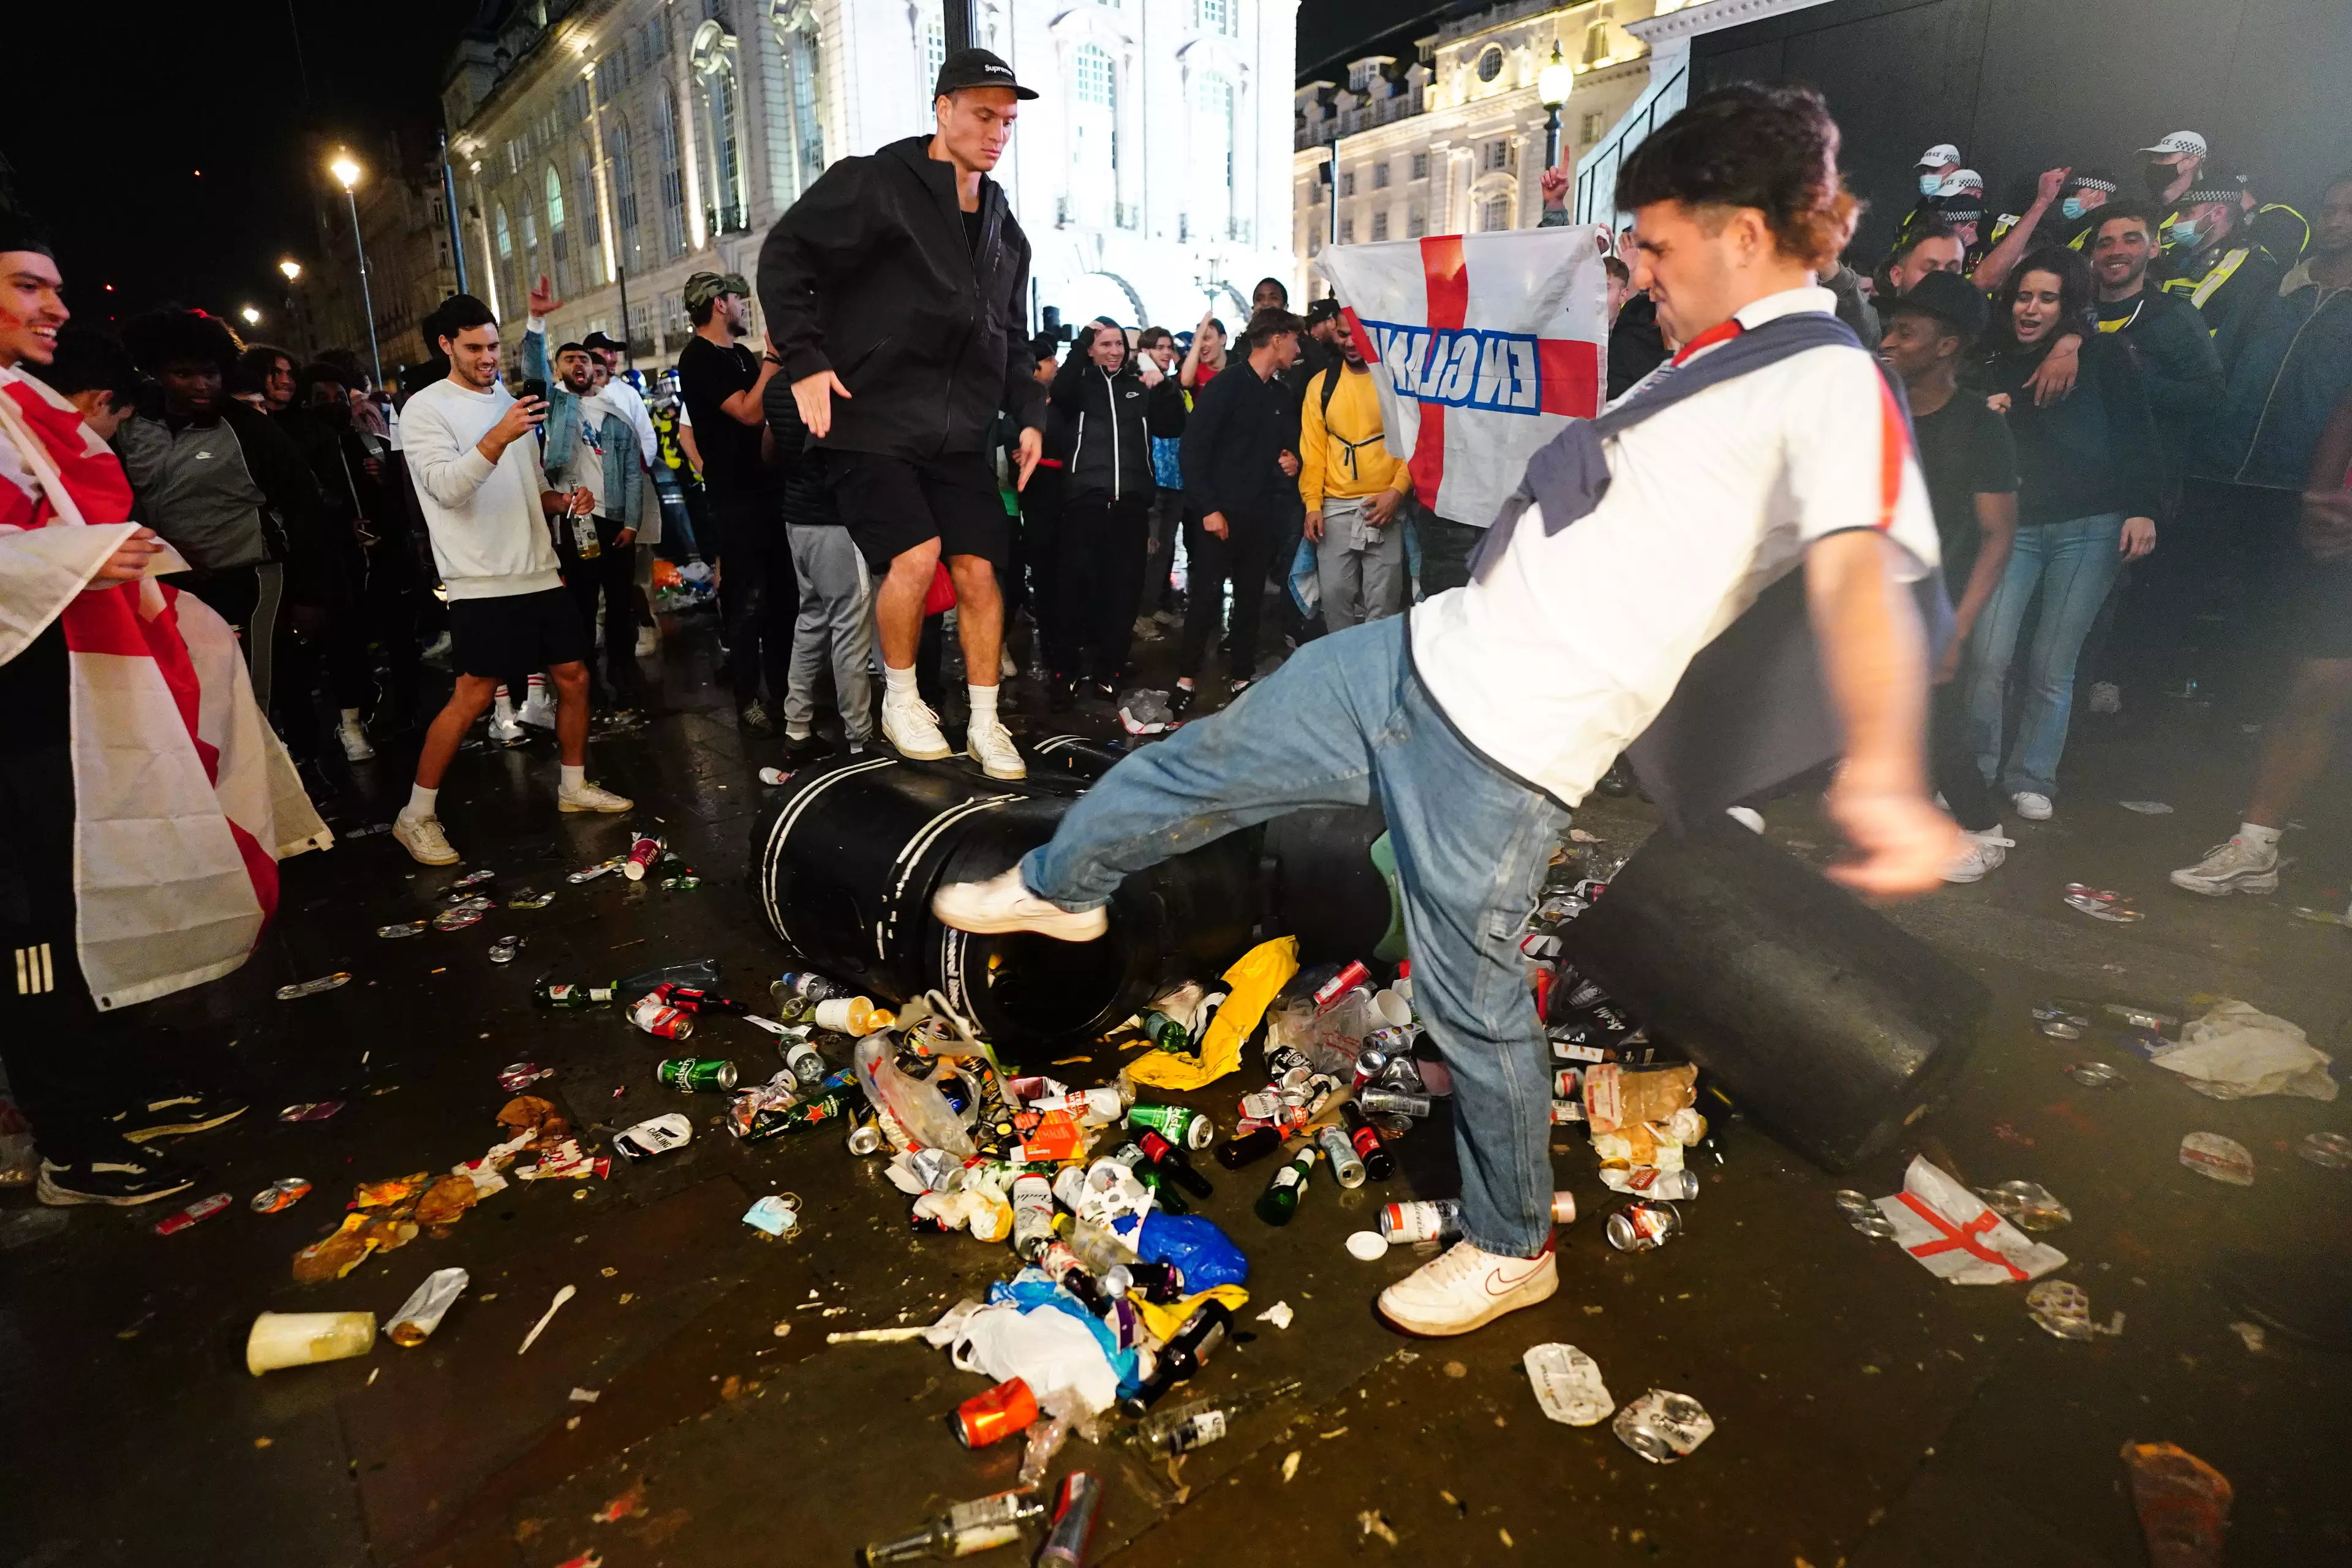 England fans taking their anger out on a bin after the final.